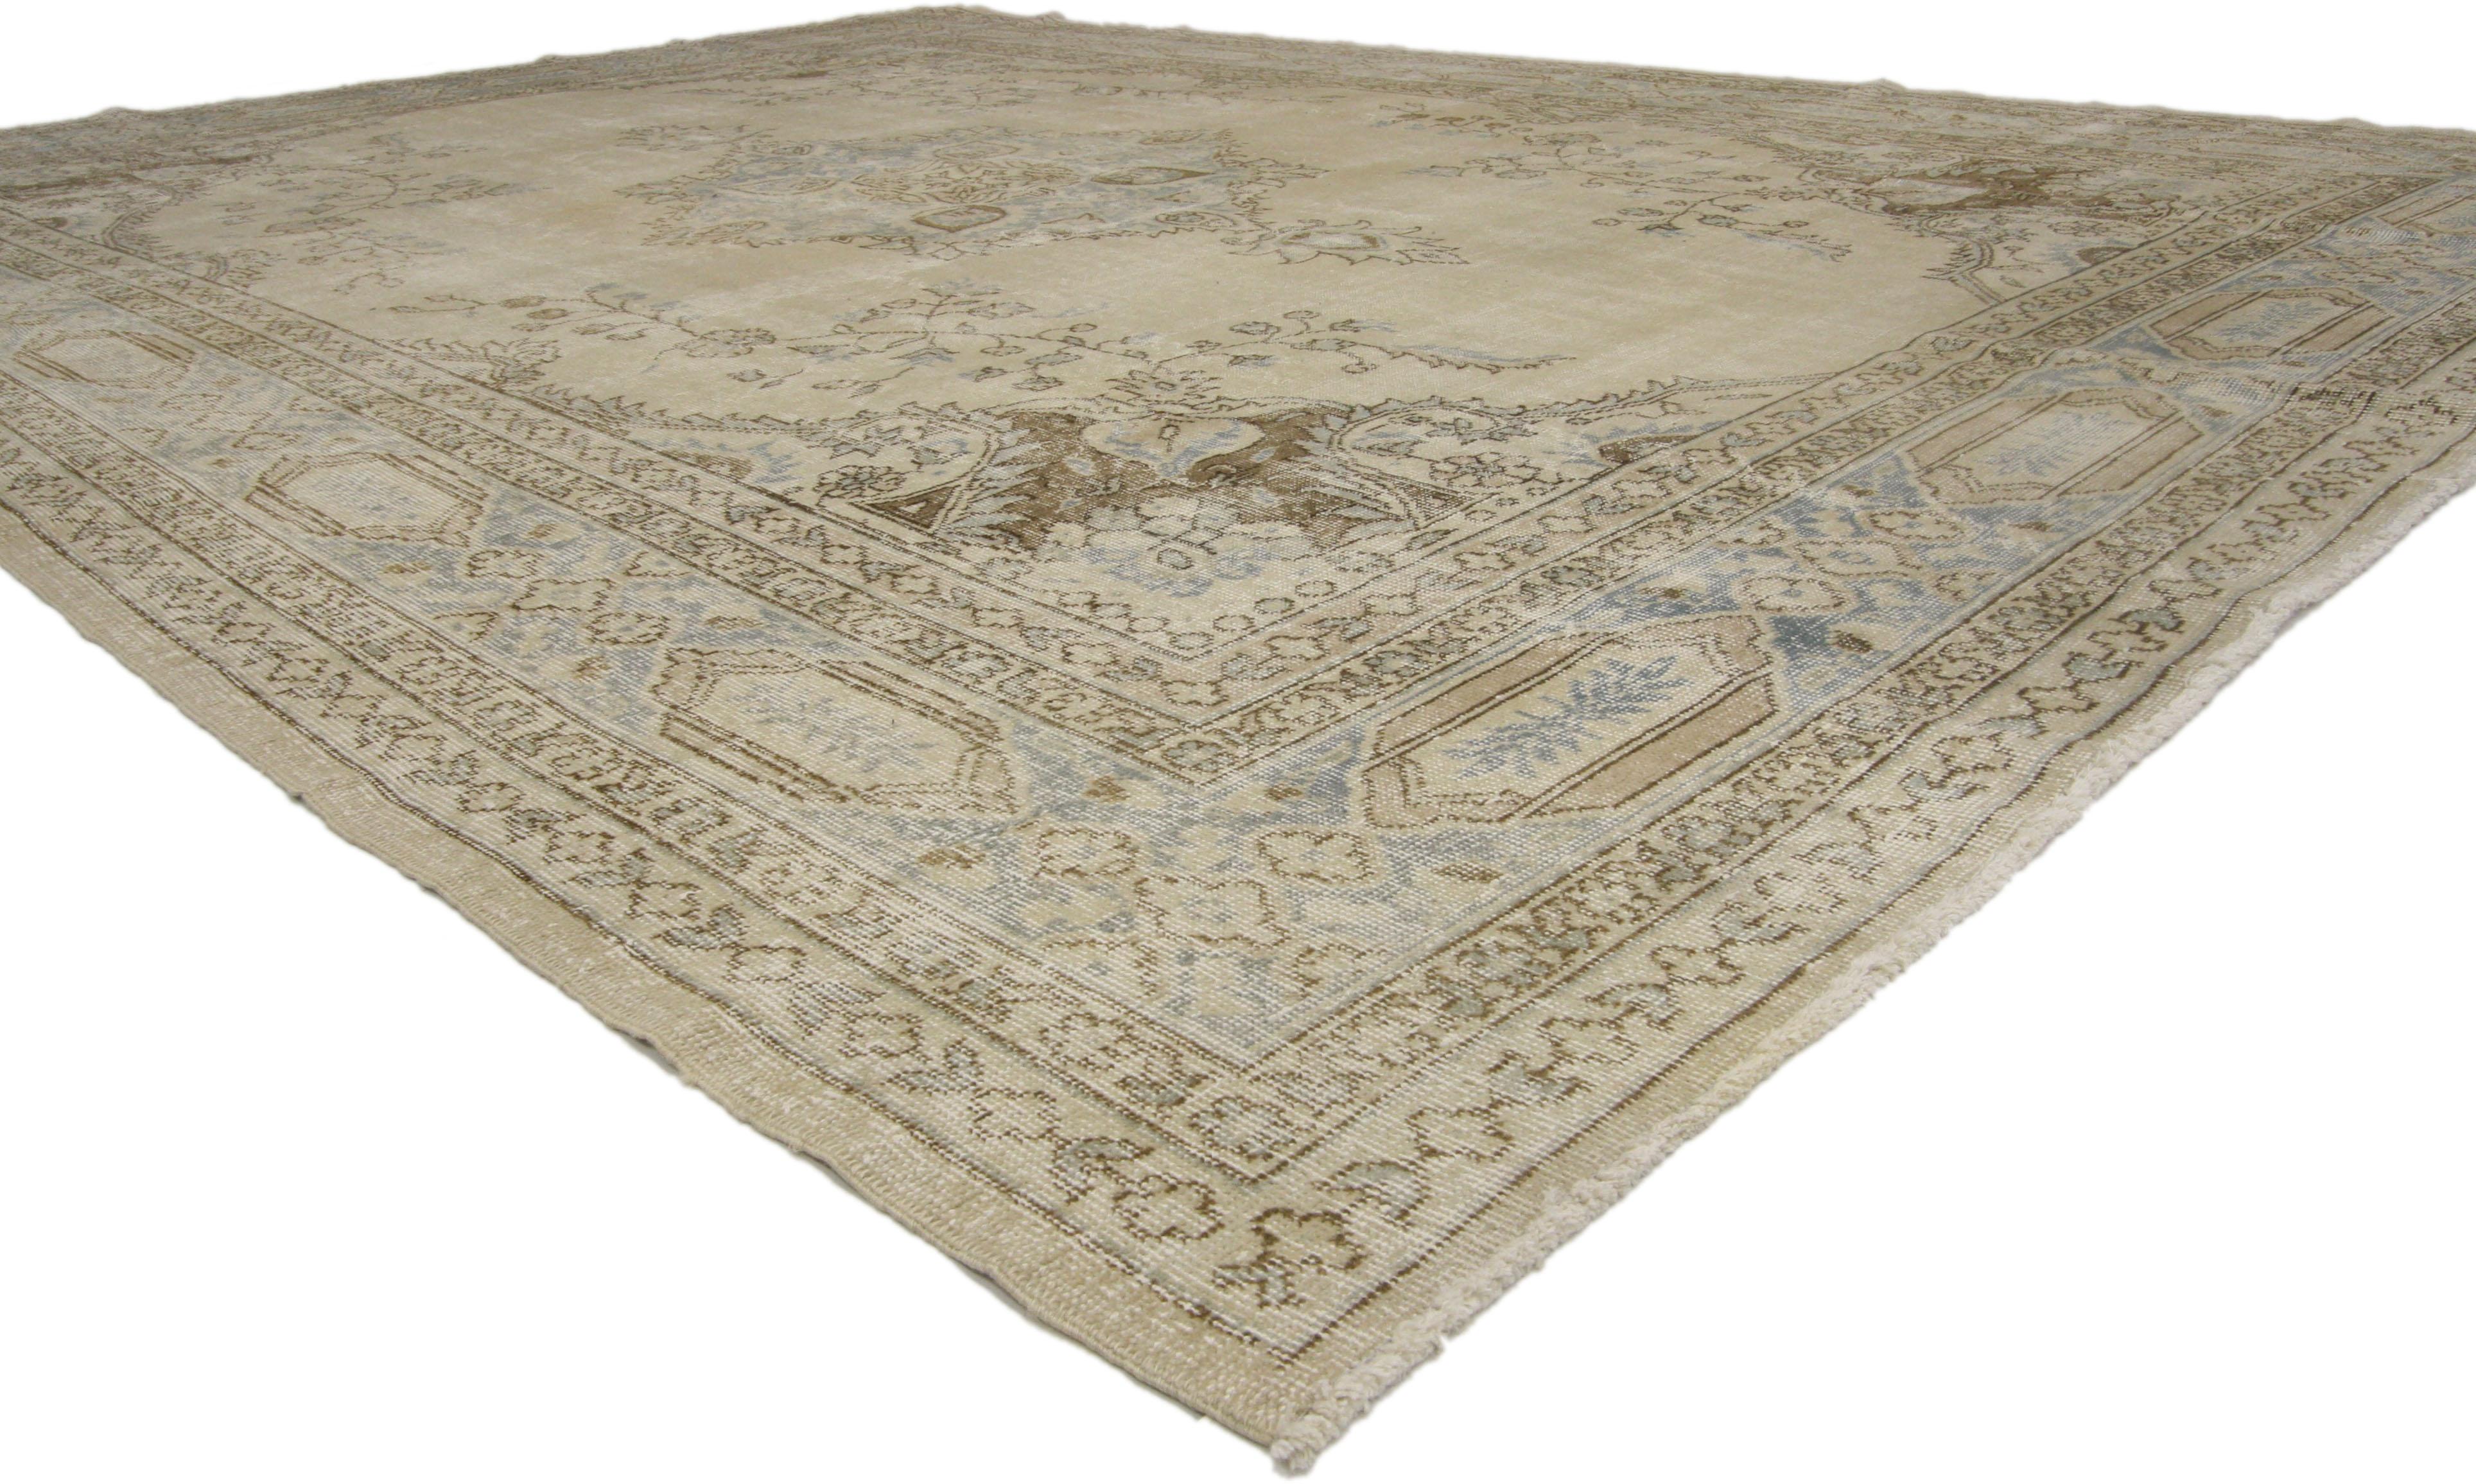 51108 Distressed Turkish Sivas Rug with Shabby Chic Farmhouse Gustavian Style 08'05 x 11'06. Lovingly timeworn with Gustavian grace, this hand knotted wool distressed Turkish Sivas rug beautifully embodies a Swedish Farmhouse style. Take center